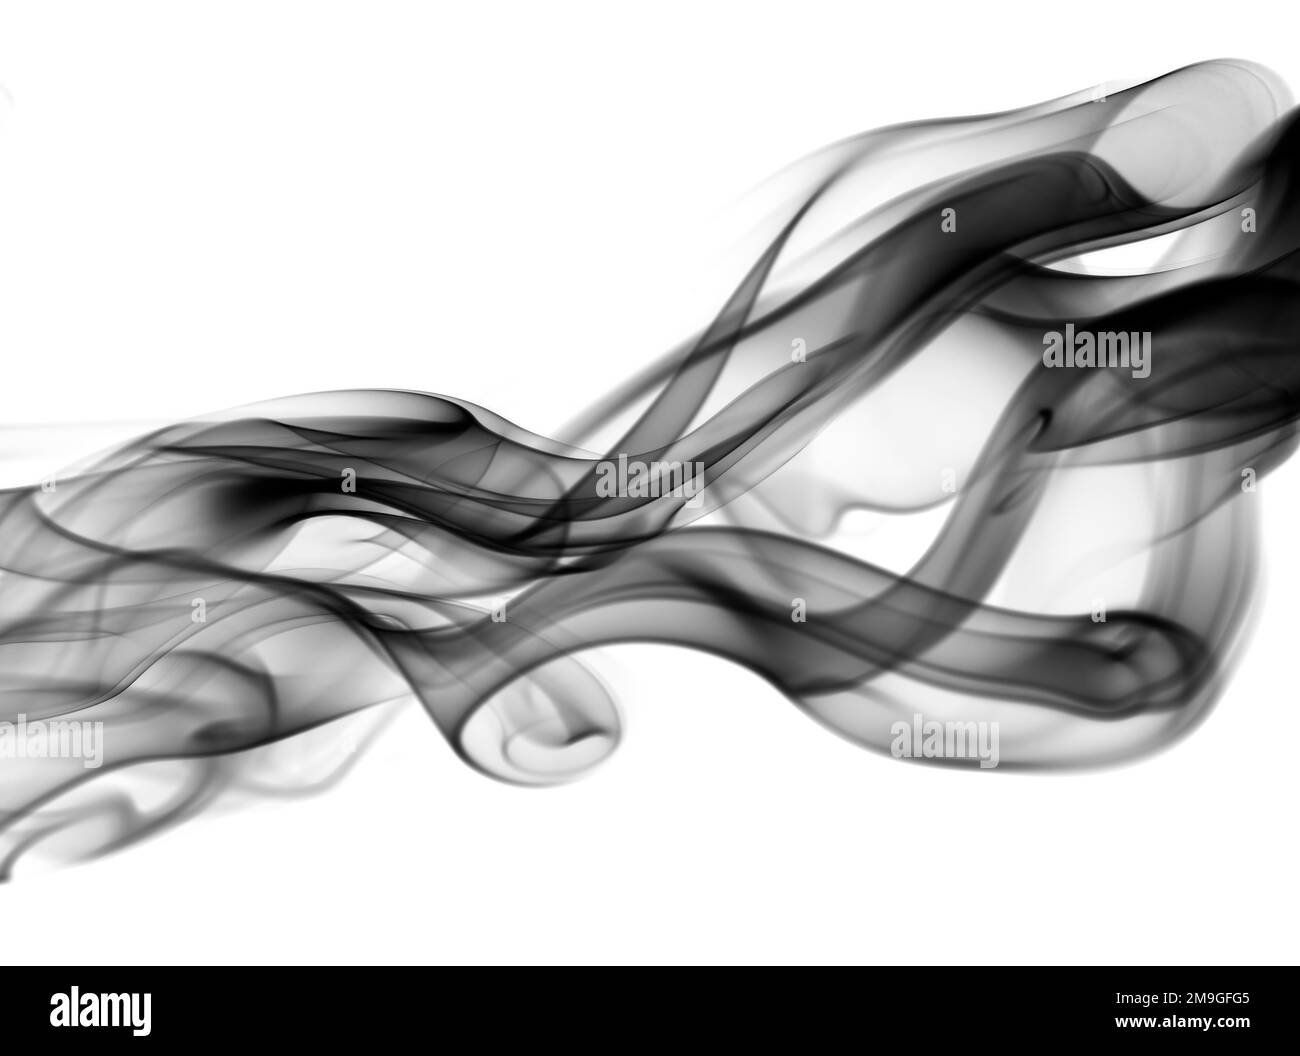 Artistic looking smoke swirls photographed against a plain white background Stock Photo